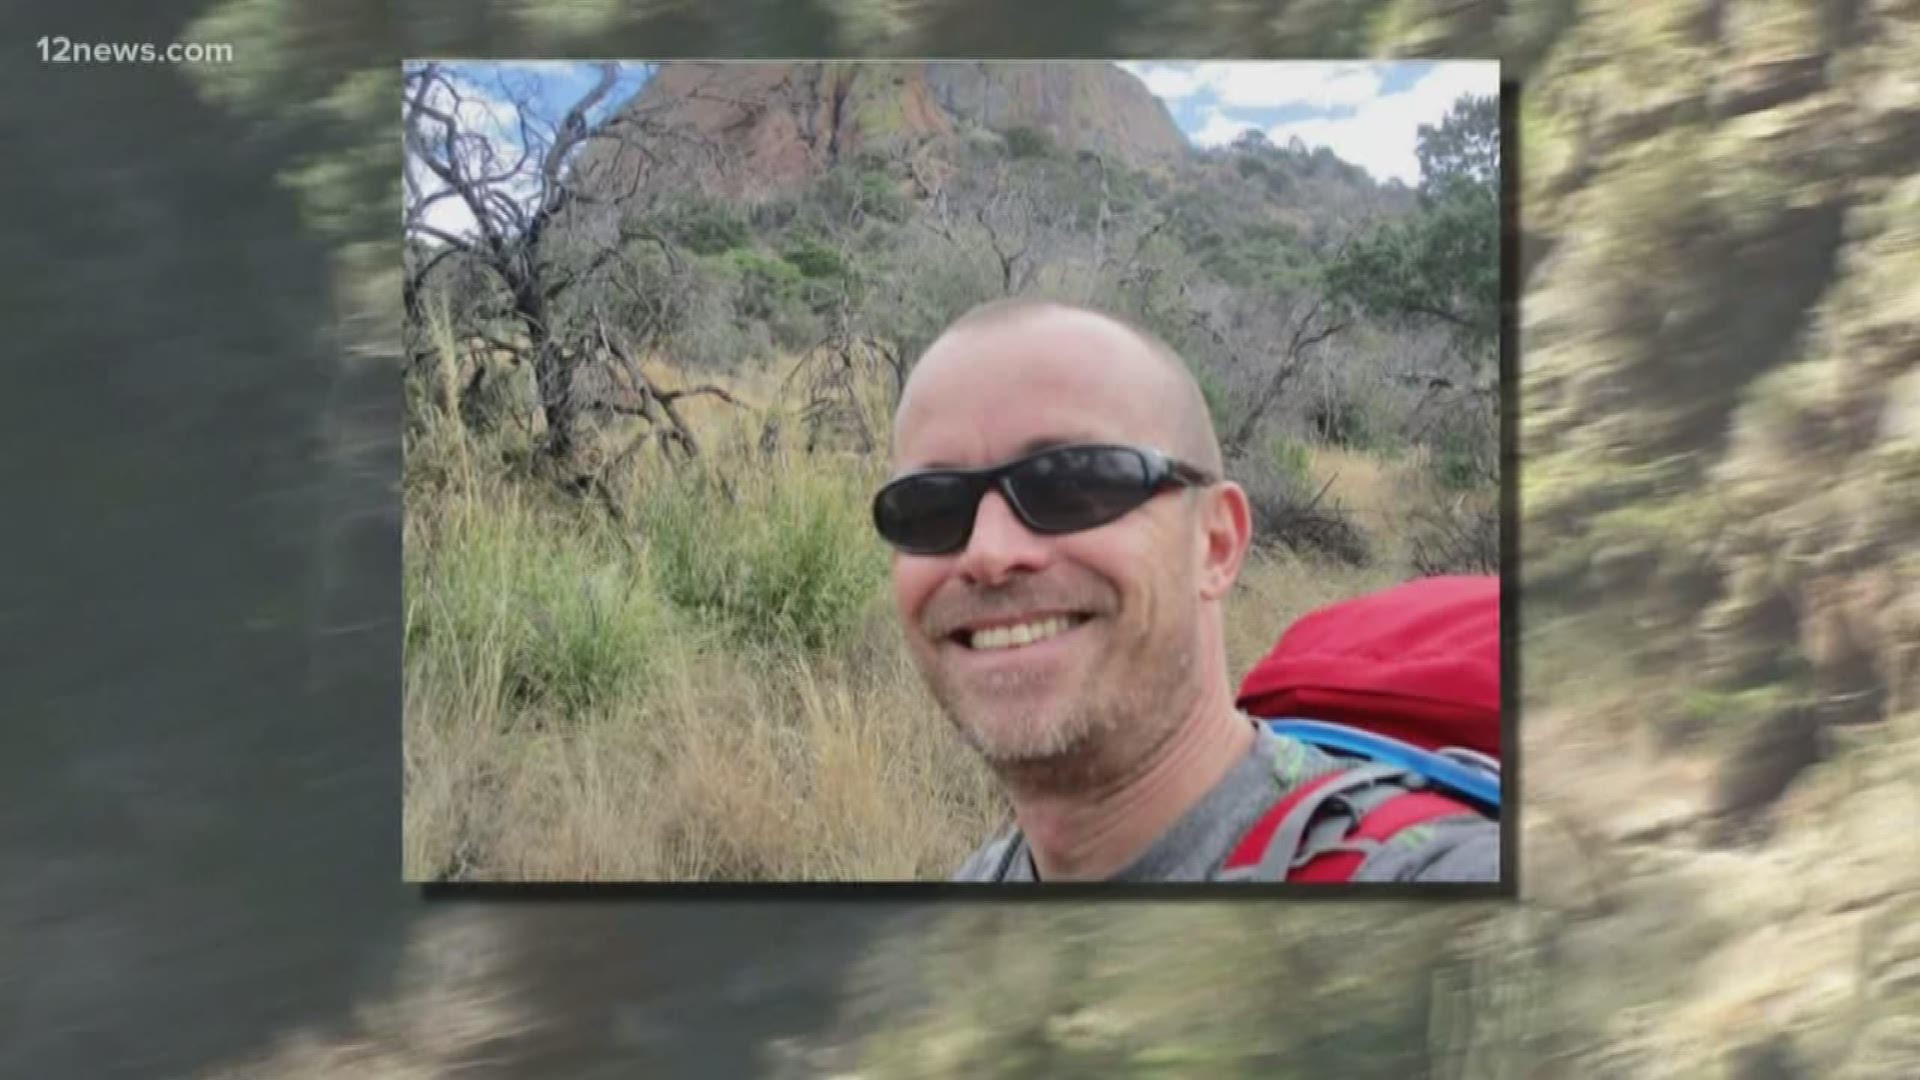 The body of Shiloh Dorsett, a Mesa man who was canyoneering in the Cherry Creek area, was found Monday. He and another person were swept up in a flash flood.